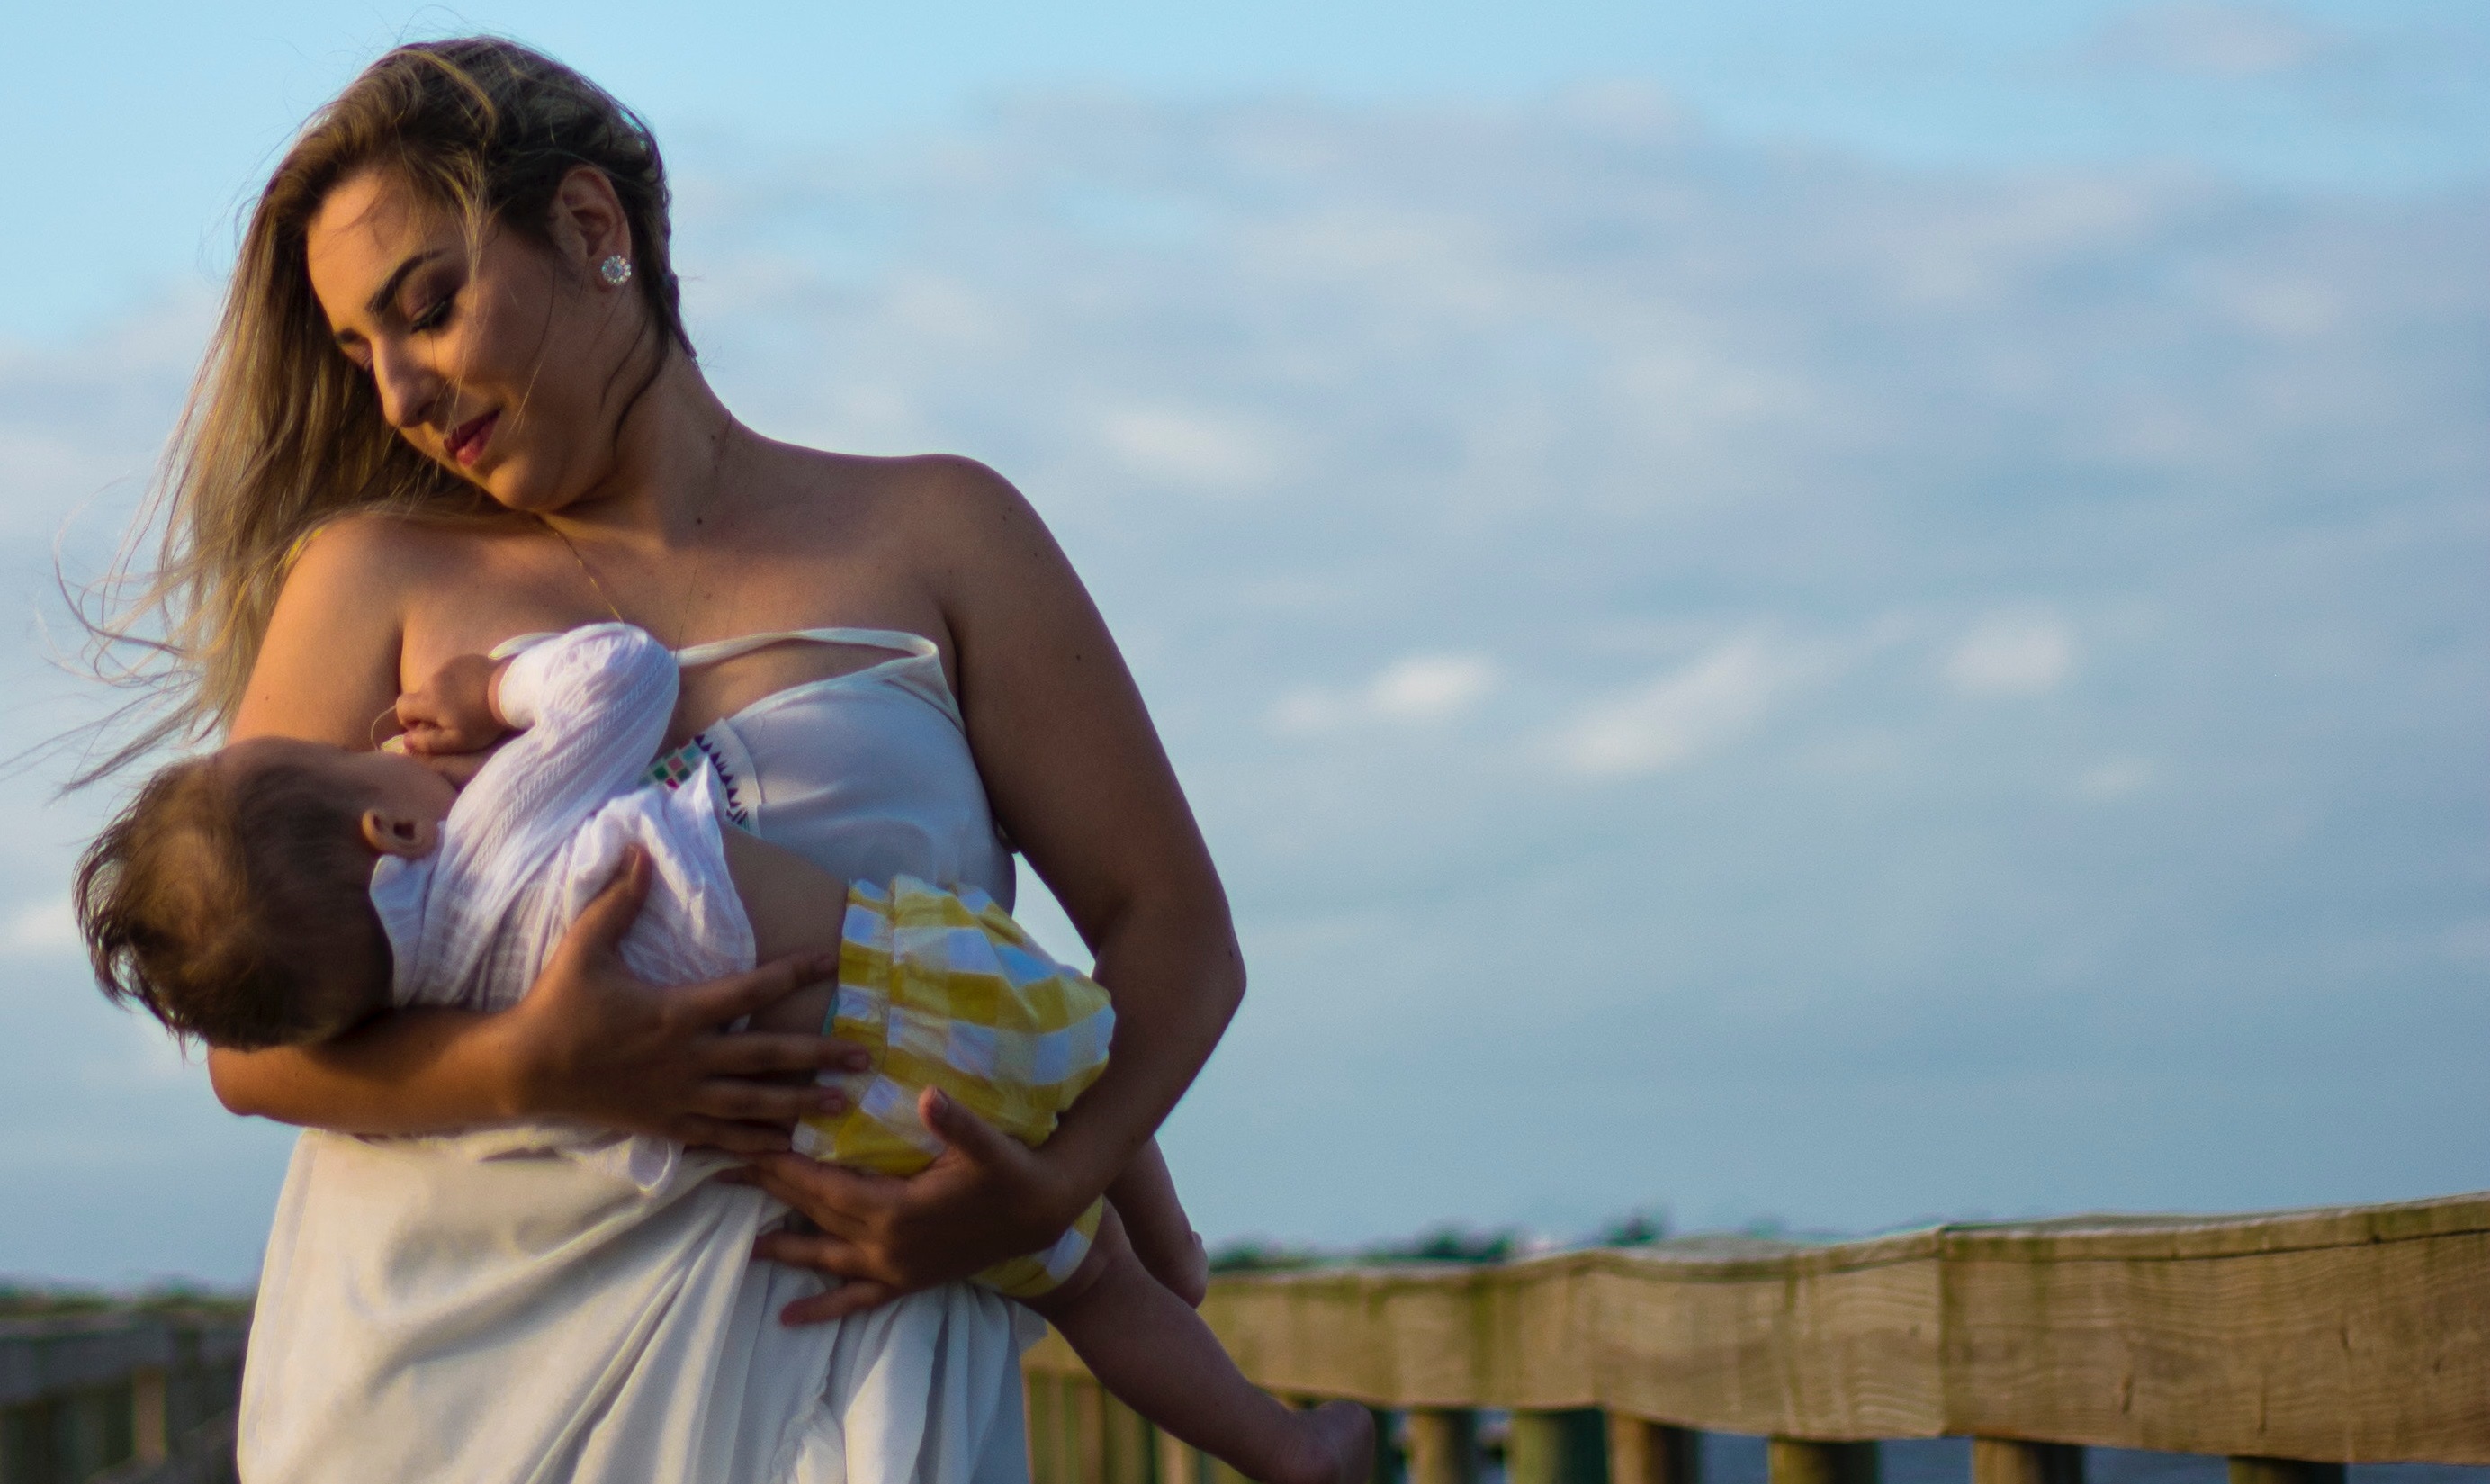 Lactation and breastfeeding support for Dare County (Duck, Southern Shores, Kitty Hawk, Kill Devil Hills, Nags Head, Manteo, Wanchese, Rodanthe, Waves, Salvo, Frisco, Buxton, and Hatteras